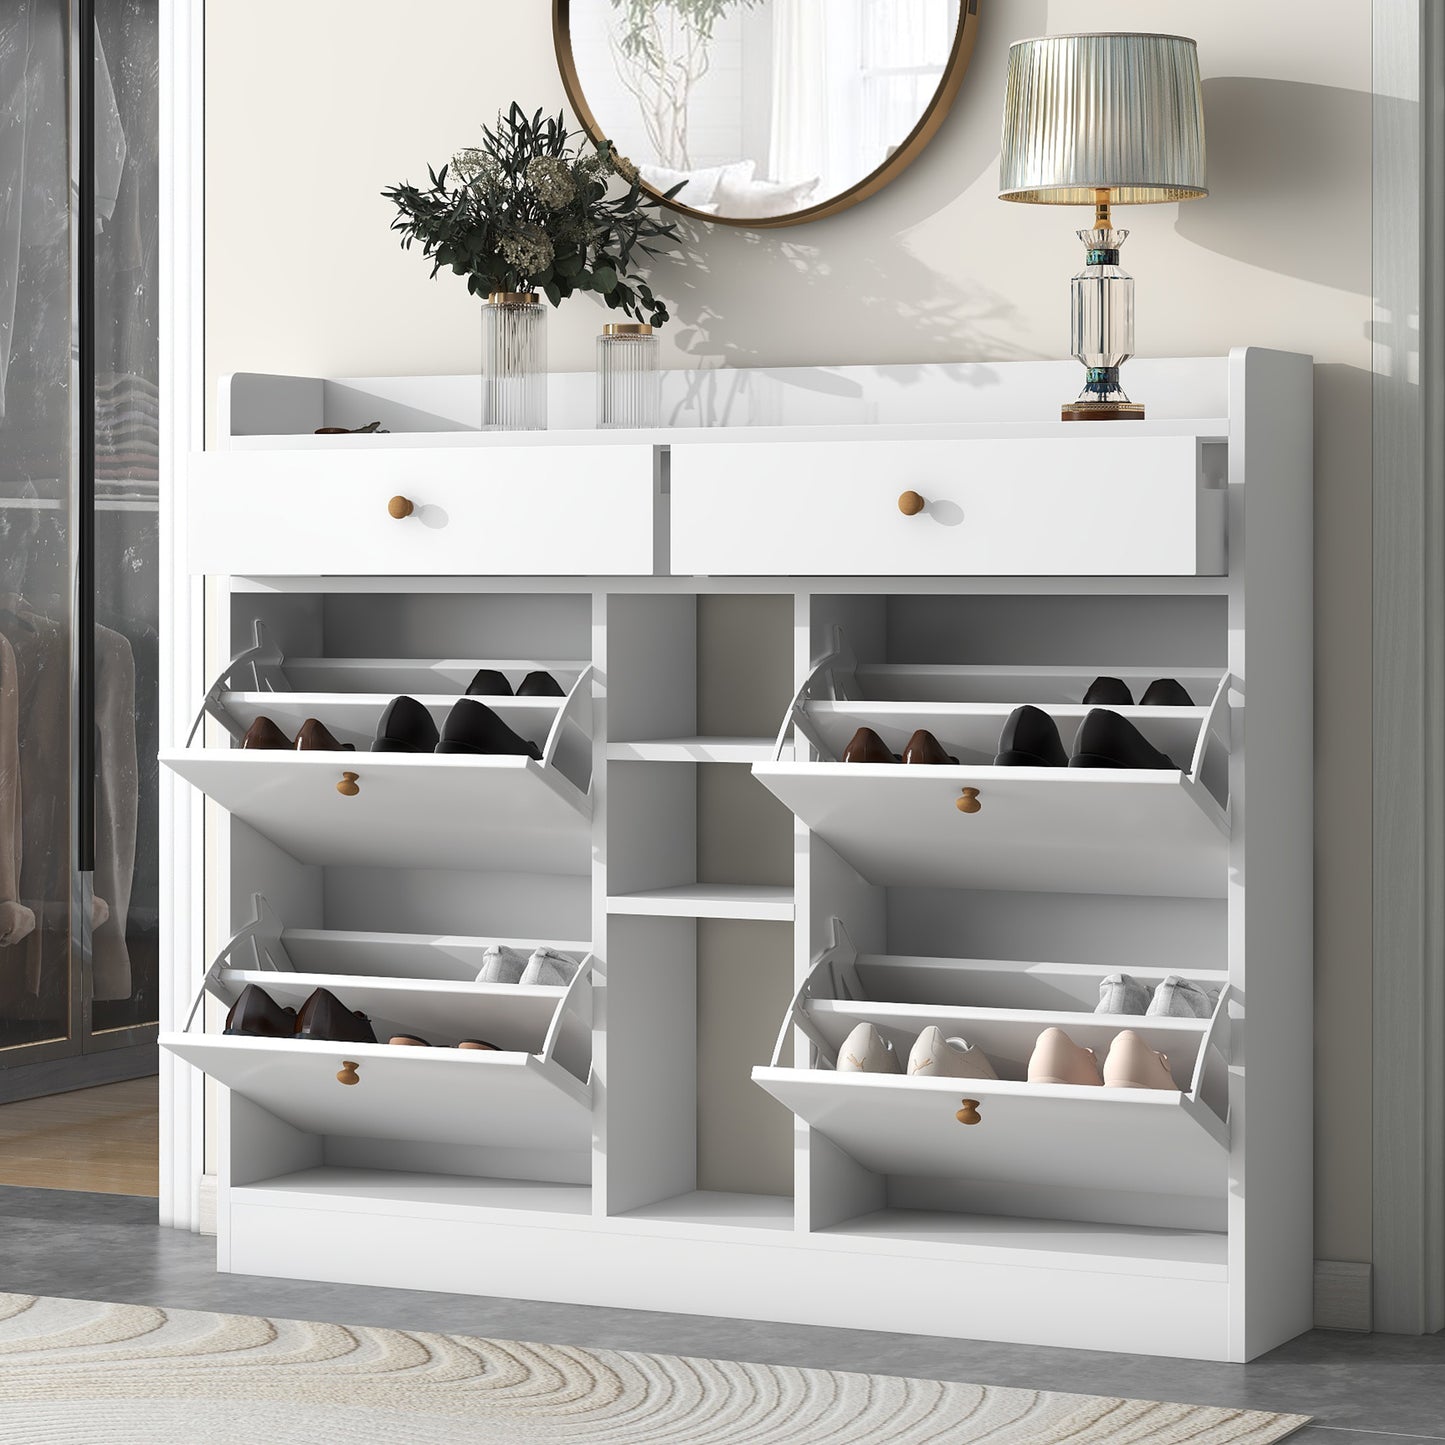 Shoe Storage Cabinet, HSUNNS 20Pair Shoe Rack Organizer with 2 Flip Drawers  for Entryway, Free Standing Shoe Storage Rack with Drawers and Open Shelf,  White 